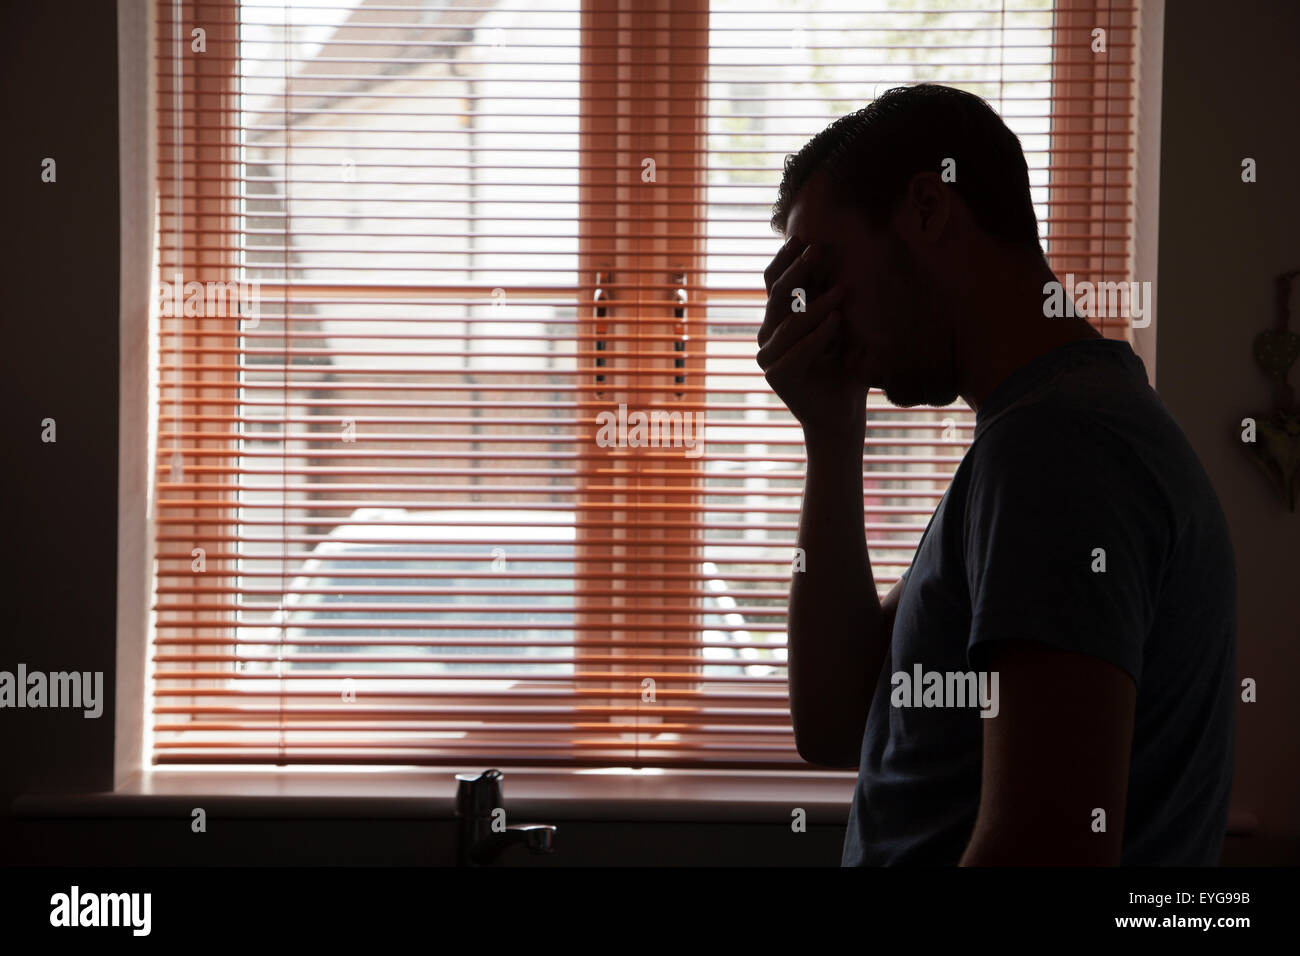 Silhouette of young male by a window. Stock Photo